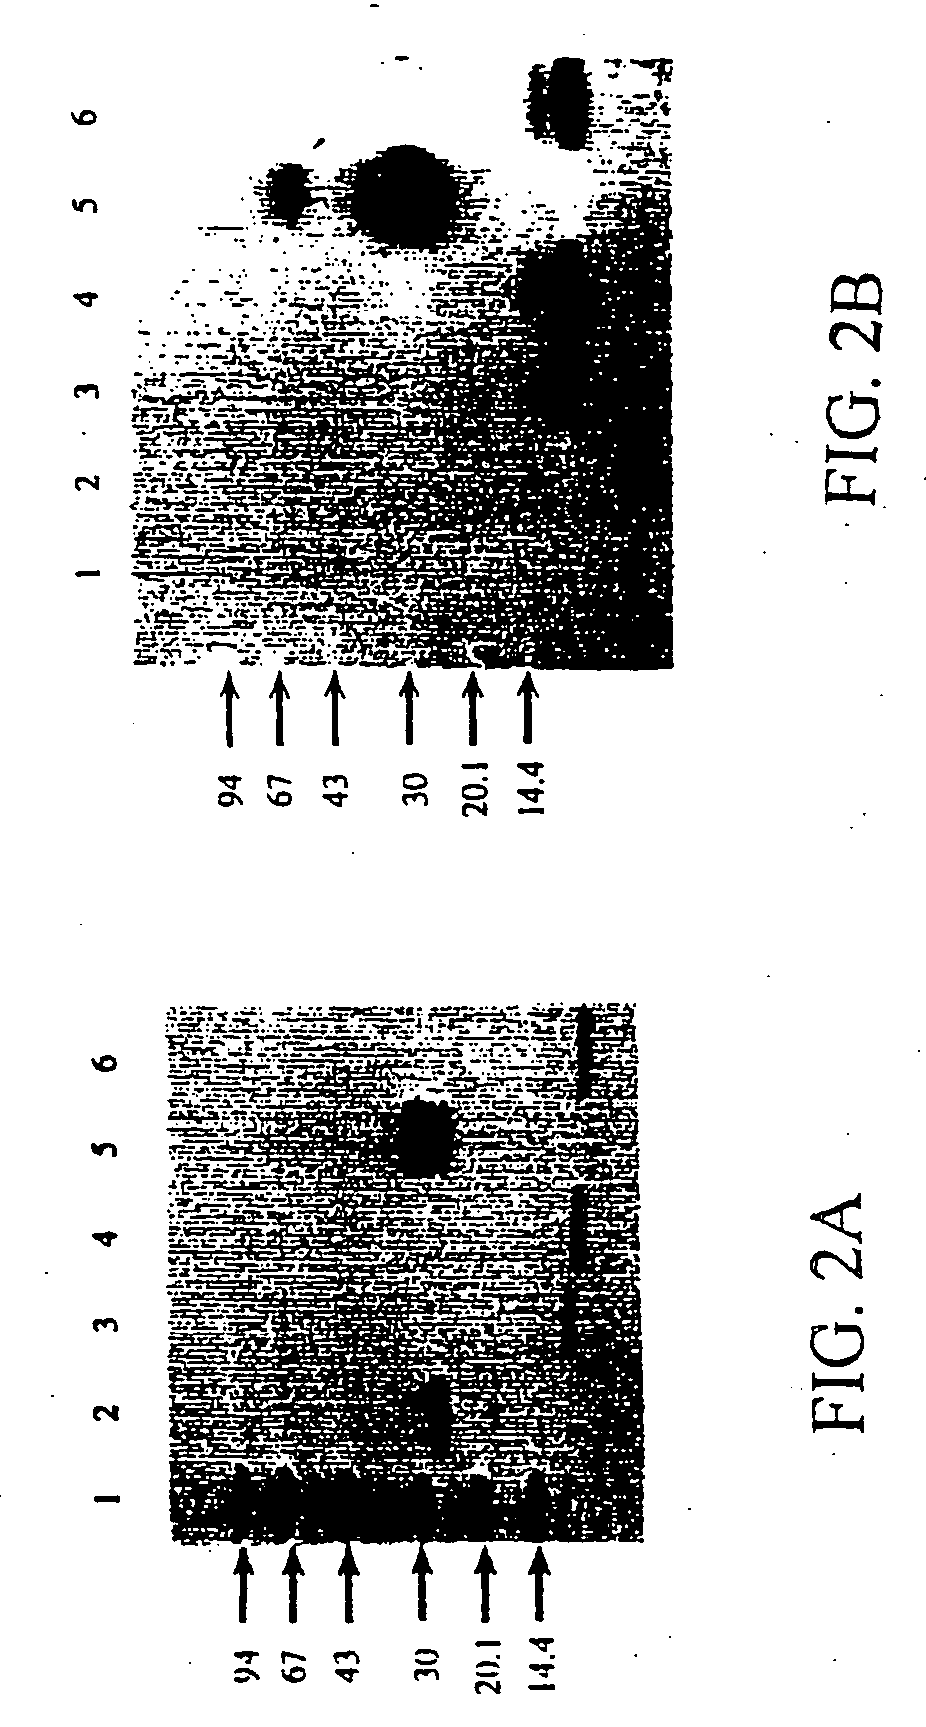 Isolated osteocalcin fragments